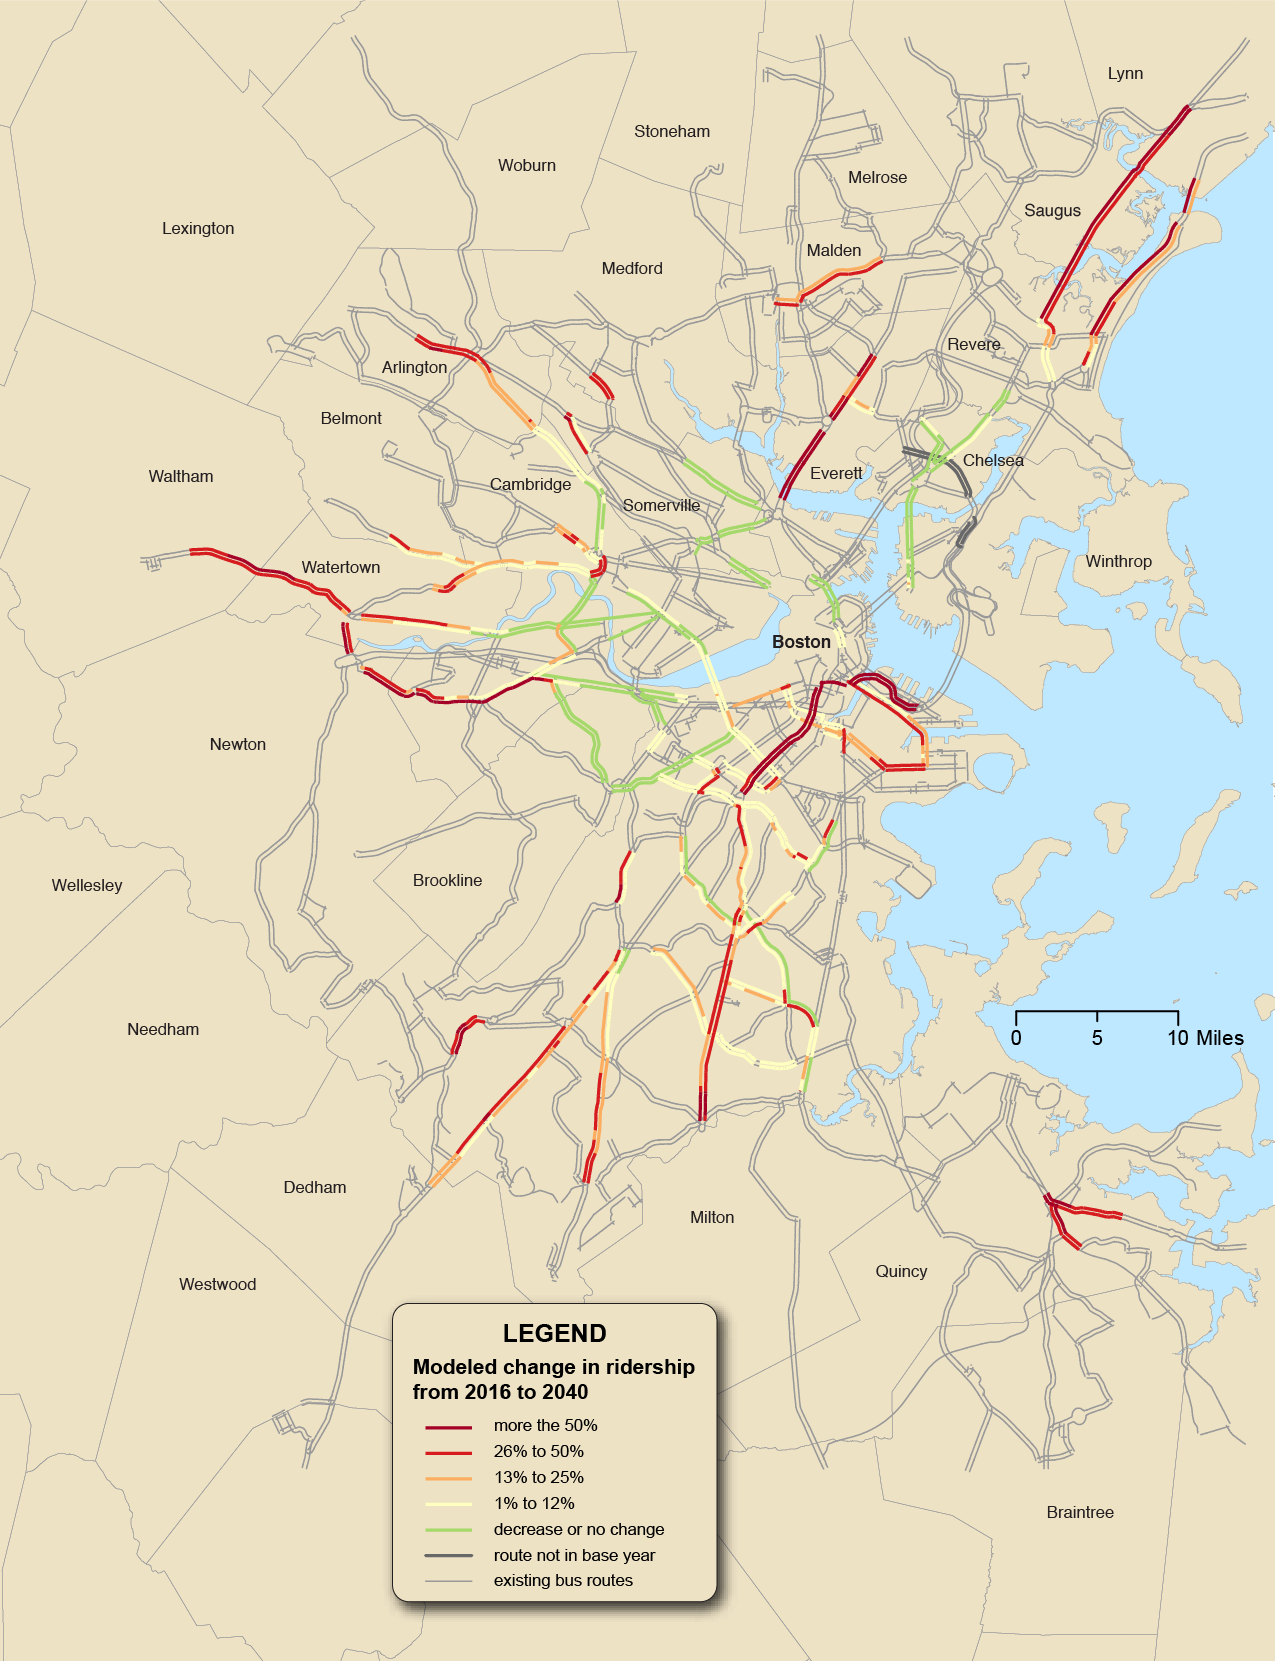 Figure 6-16 is a map of the Boston Region and Priority Bus Corridors with Modeled Change in Ridership from 2016-2040 shown in different shades along the corridor. Figure 6-16 also shows existing bus routes.